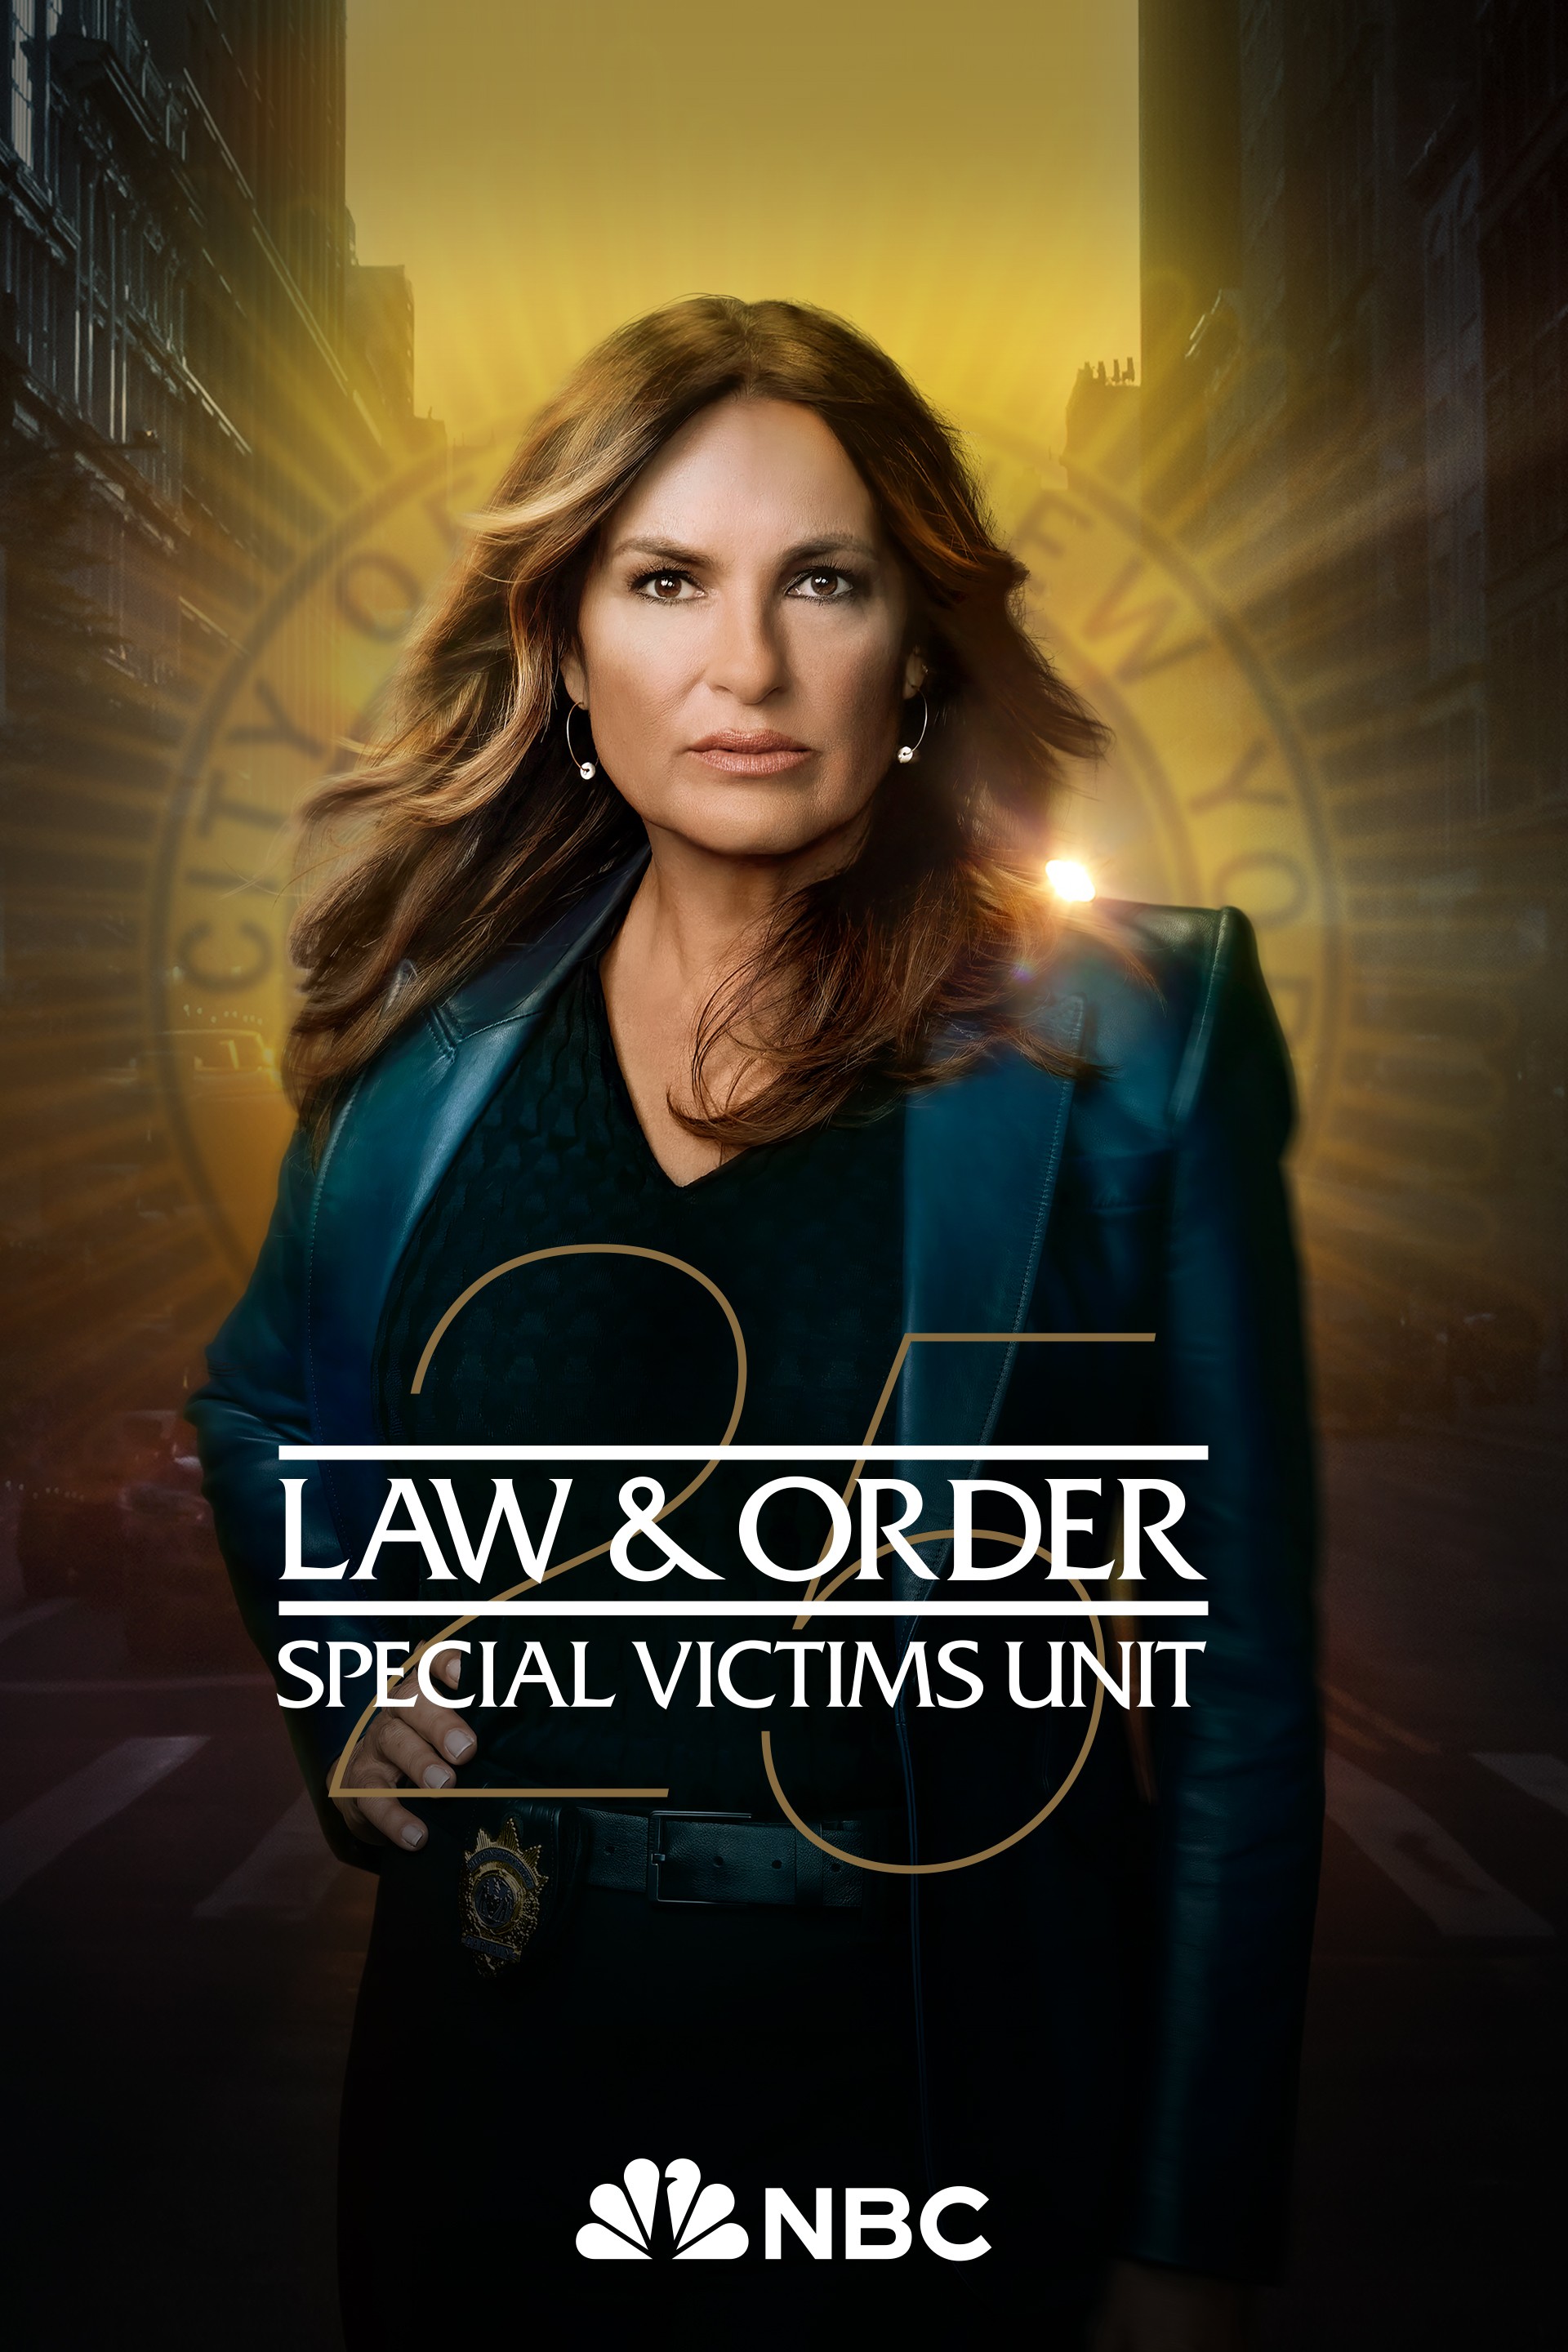 Law And Order Special Victims Unit Rotten Tomatoes